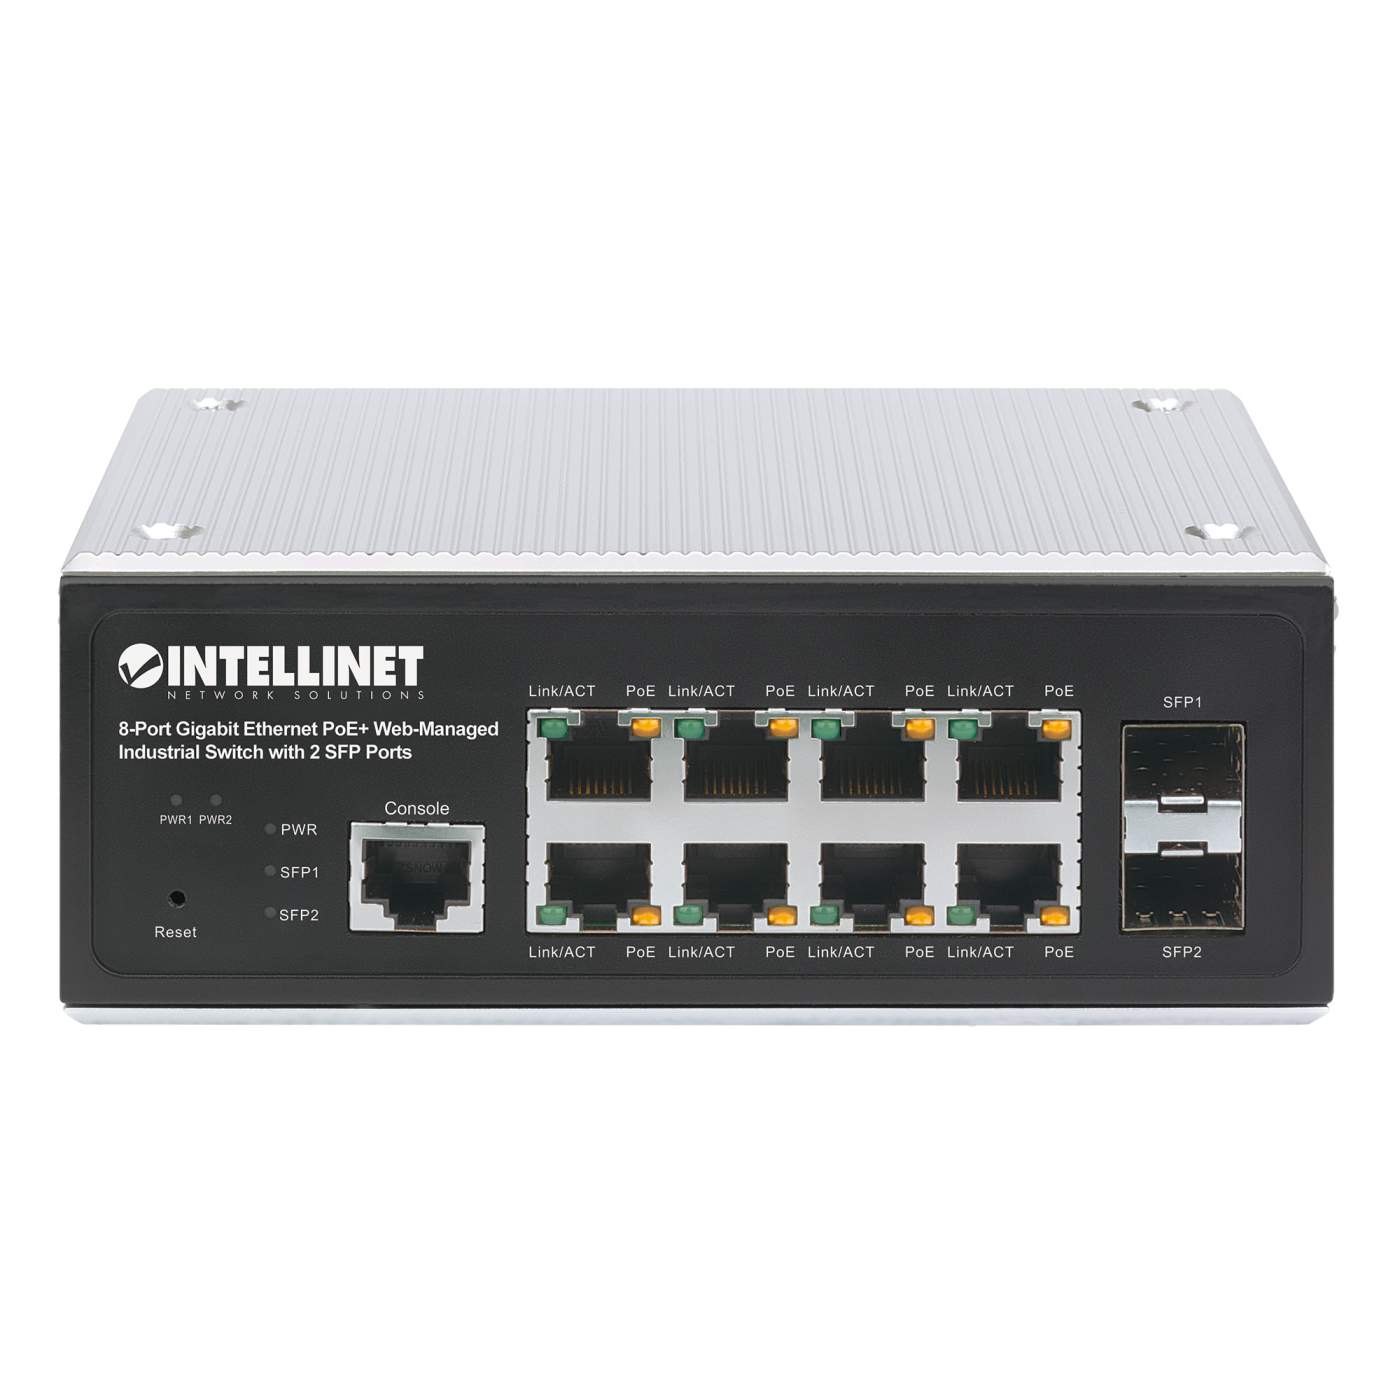 Industrial 8-Port Gigabit Ethernet PoE+ Layer 2+ Web-Managed Switch with 2 SFP Ports Image 4